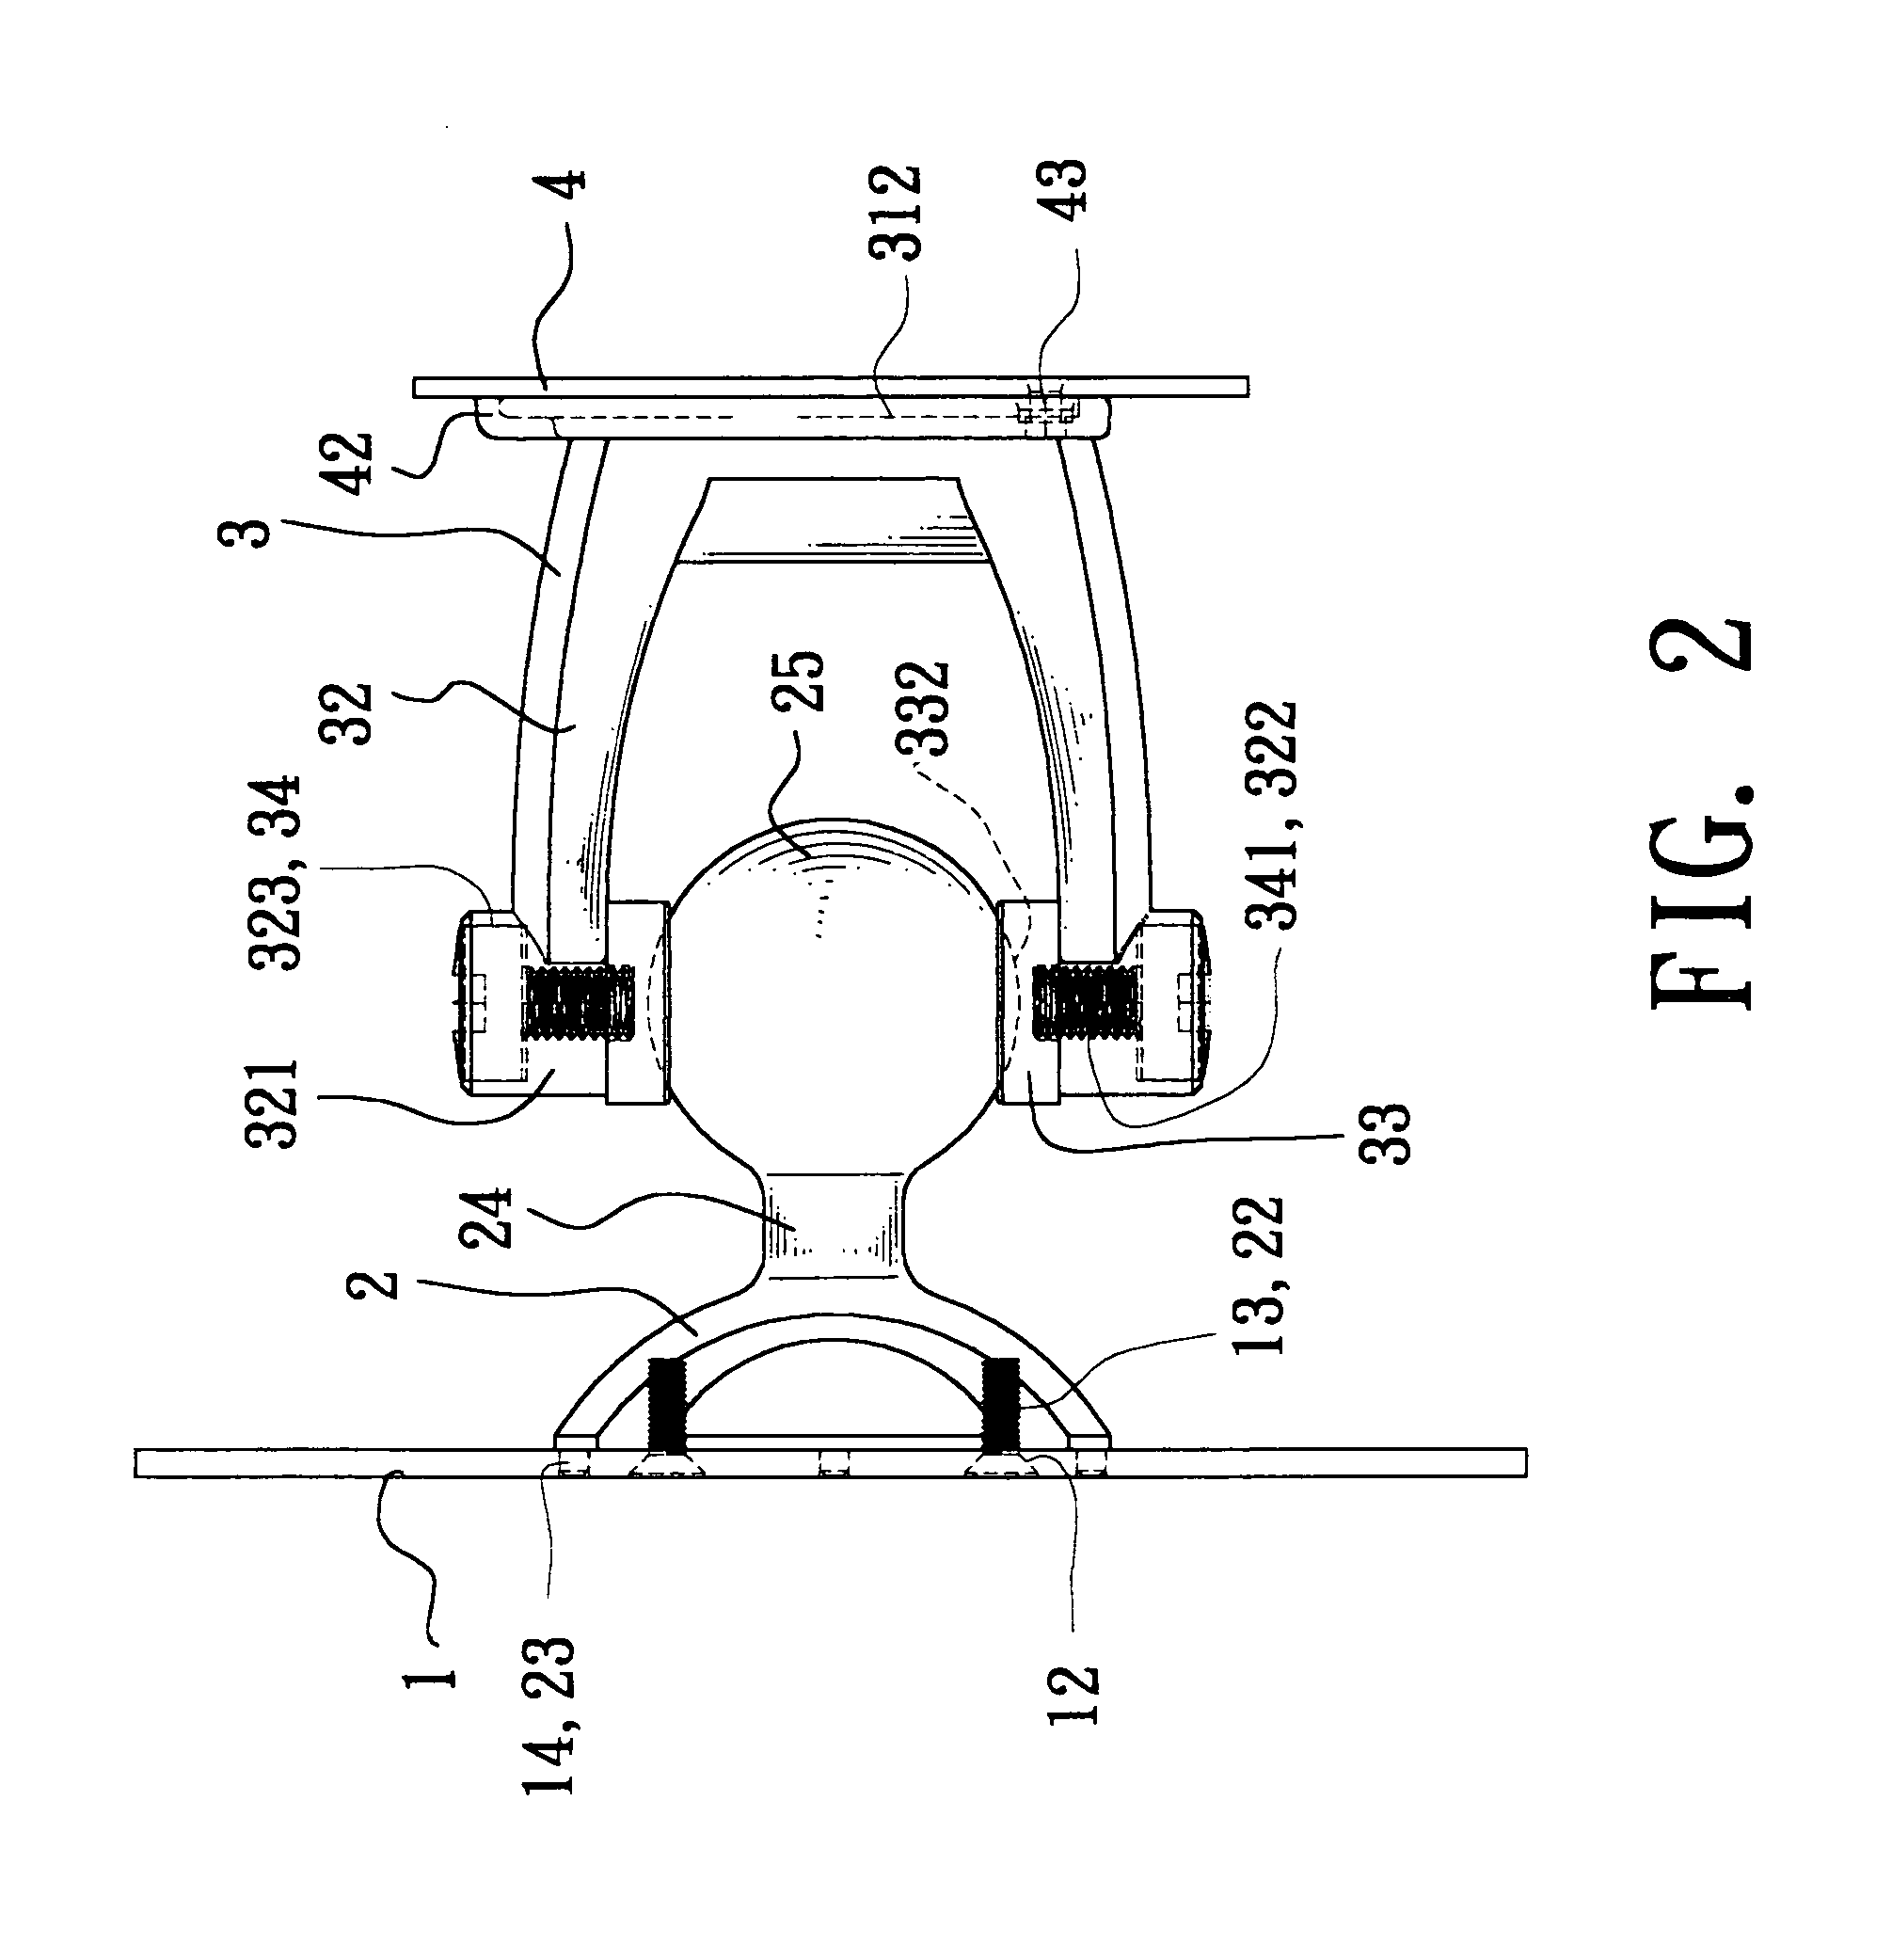 Pivotal shaft assembly for plane displays